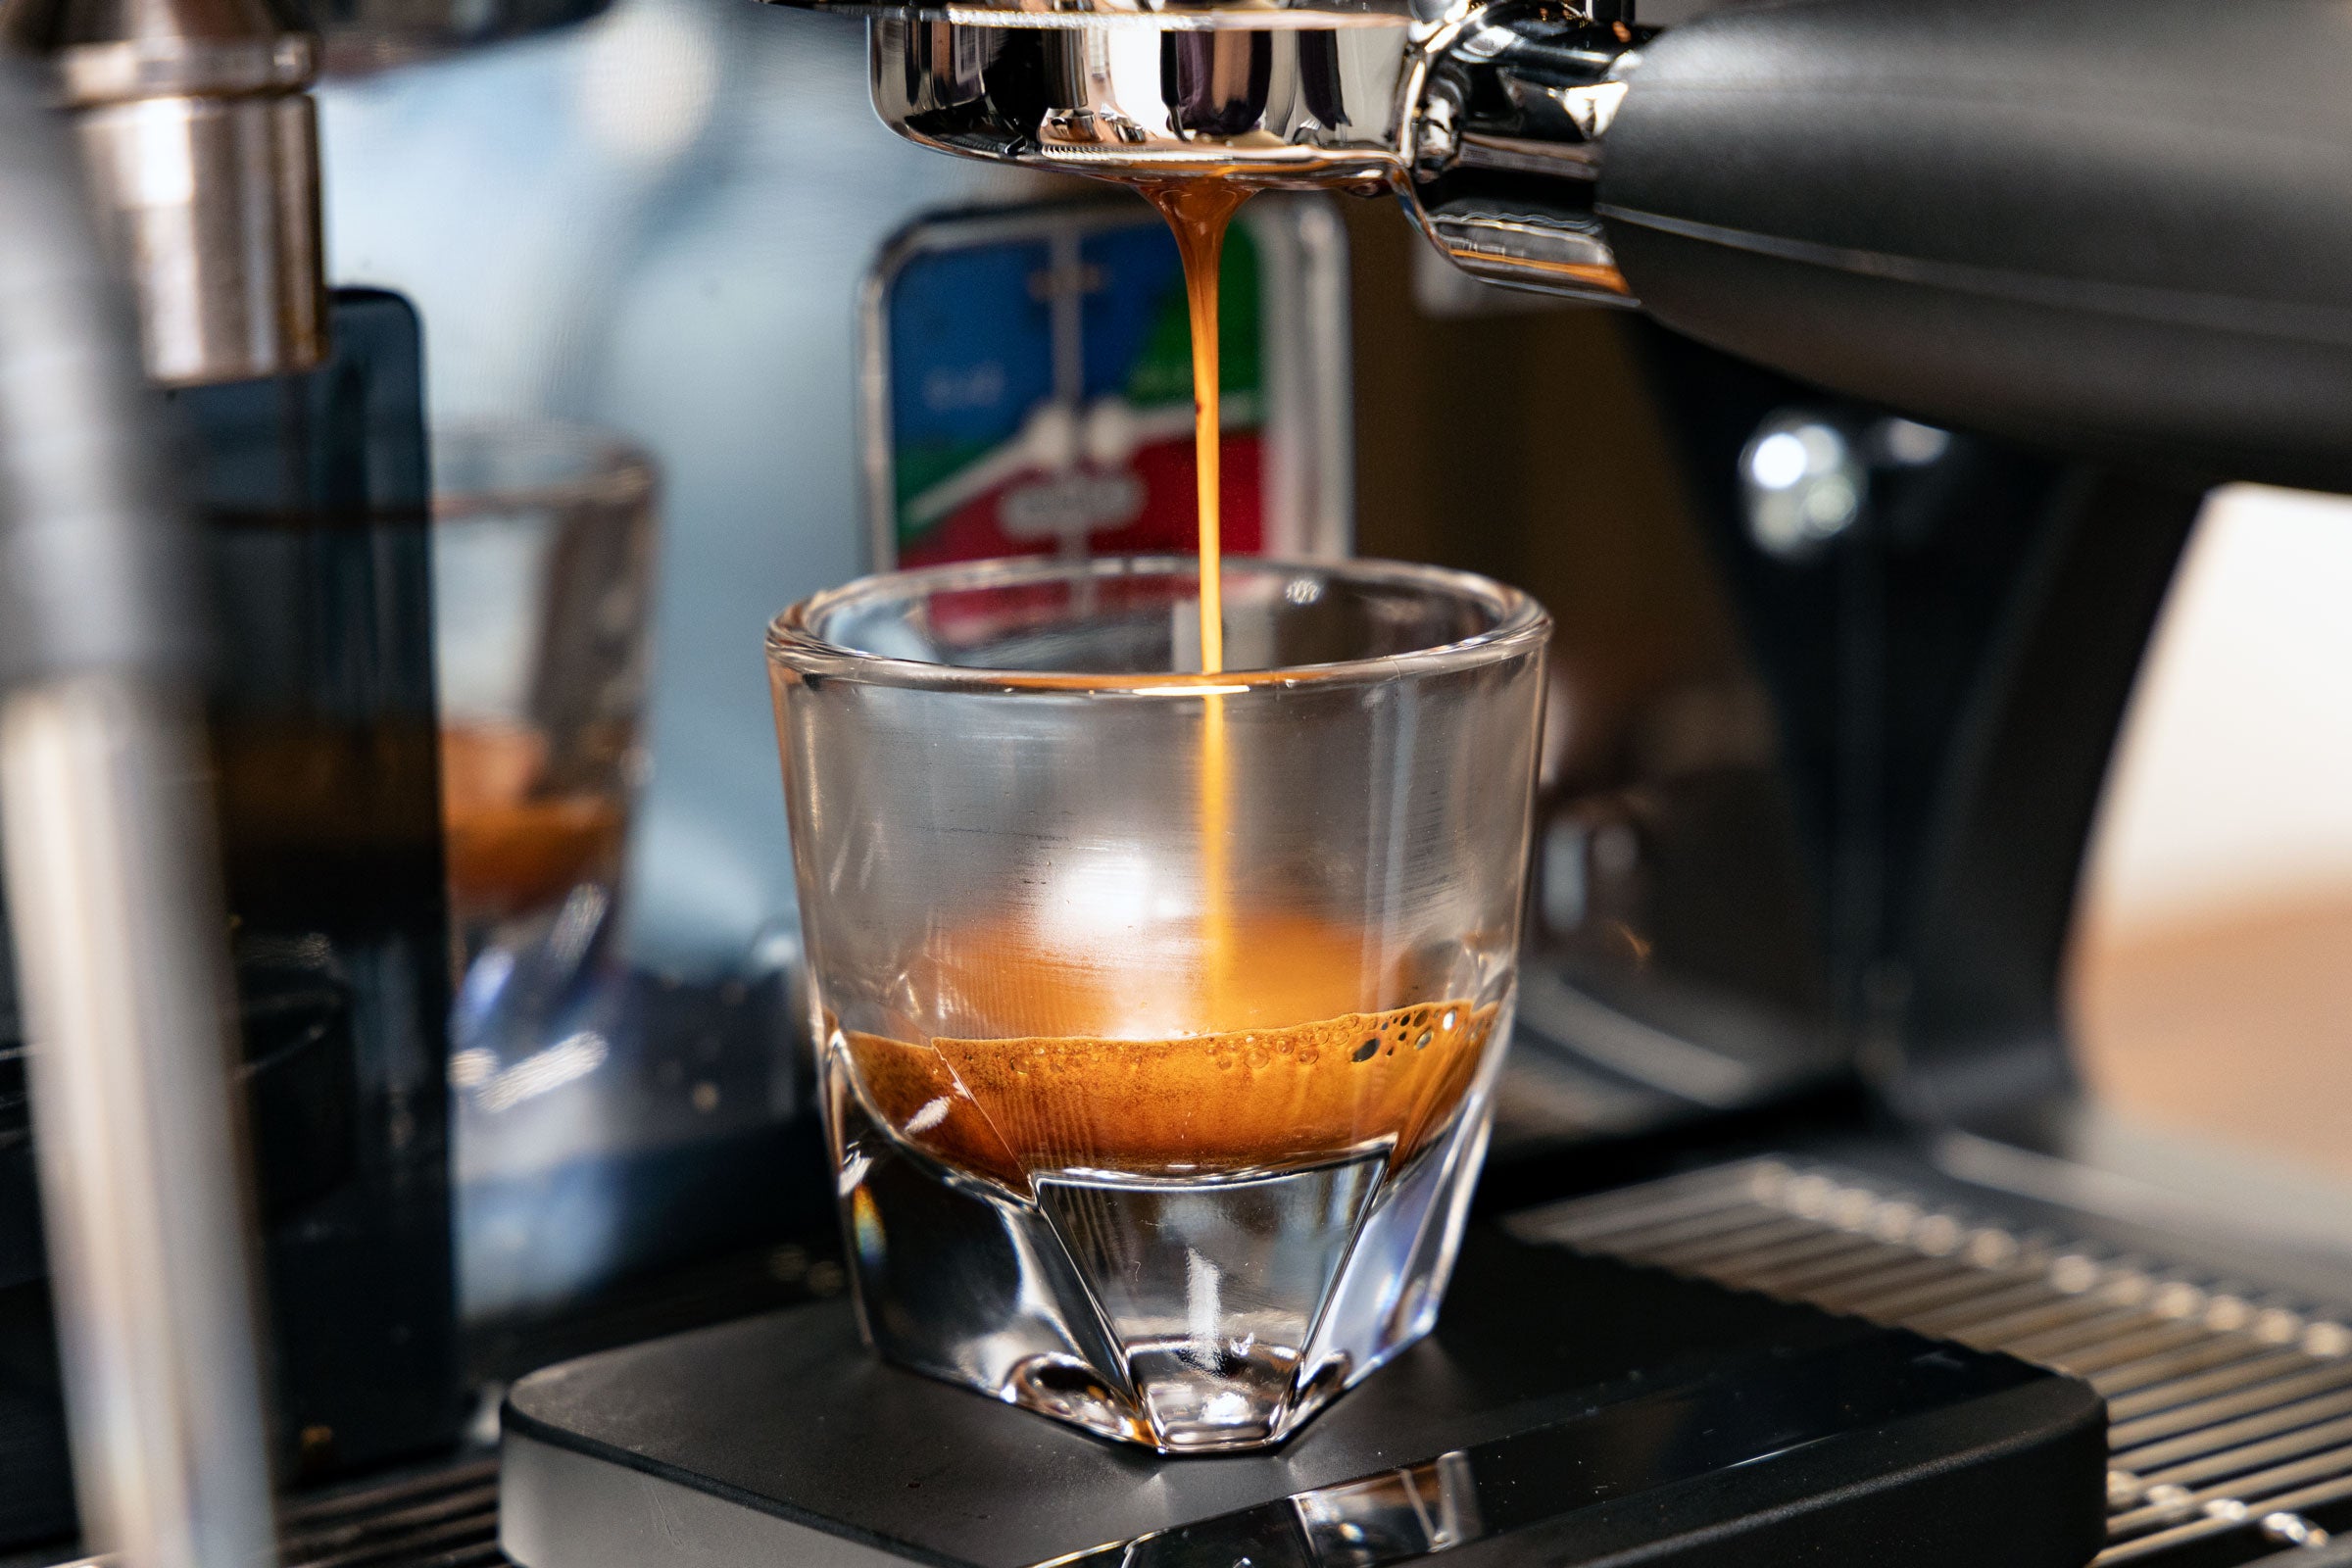 How to get the most out of the Sage/Breville Barista Express — Brewing With  Dani